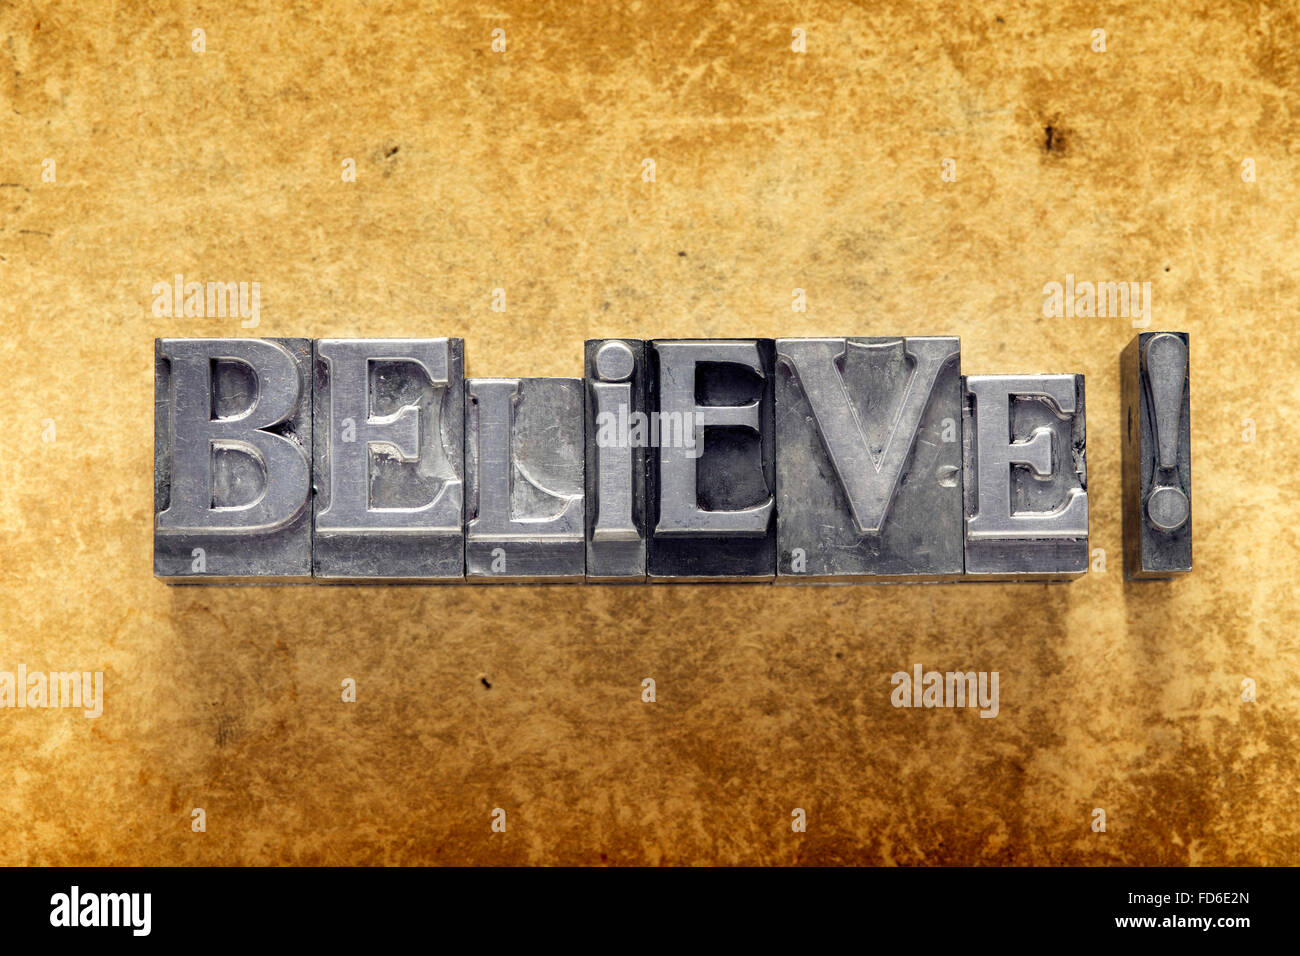 believe exclamation made from metallic letterpress type on vintage cardboard Stock Photo